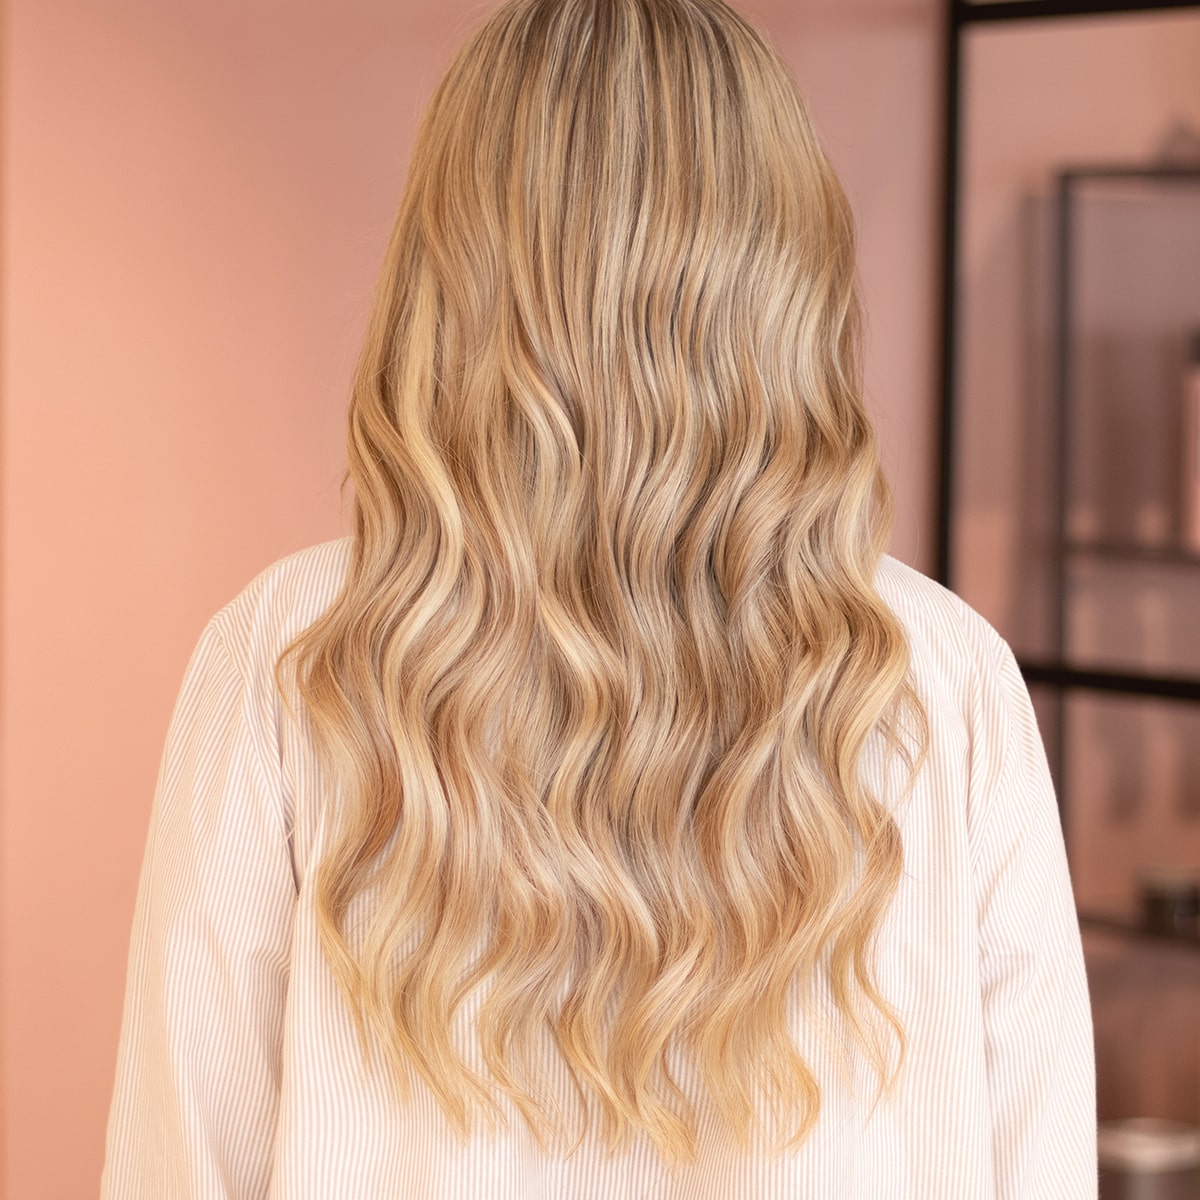 Halo hair extensions - Mix nr. 10/22